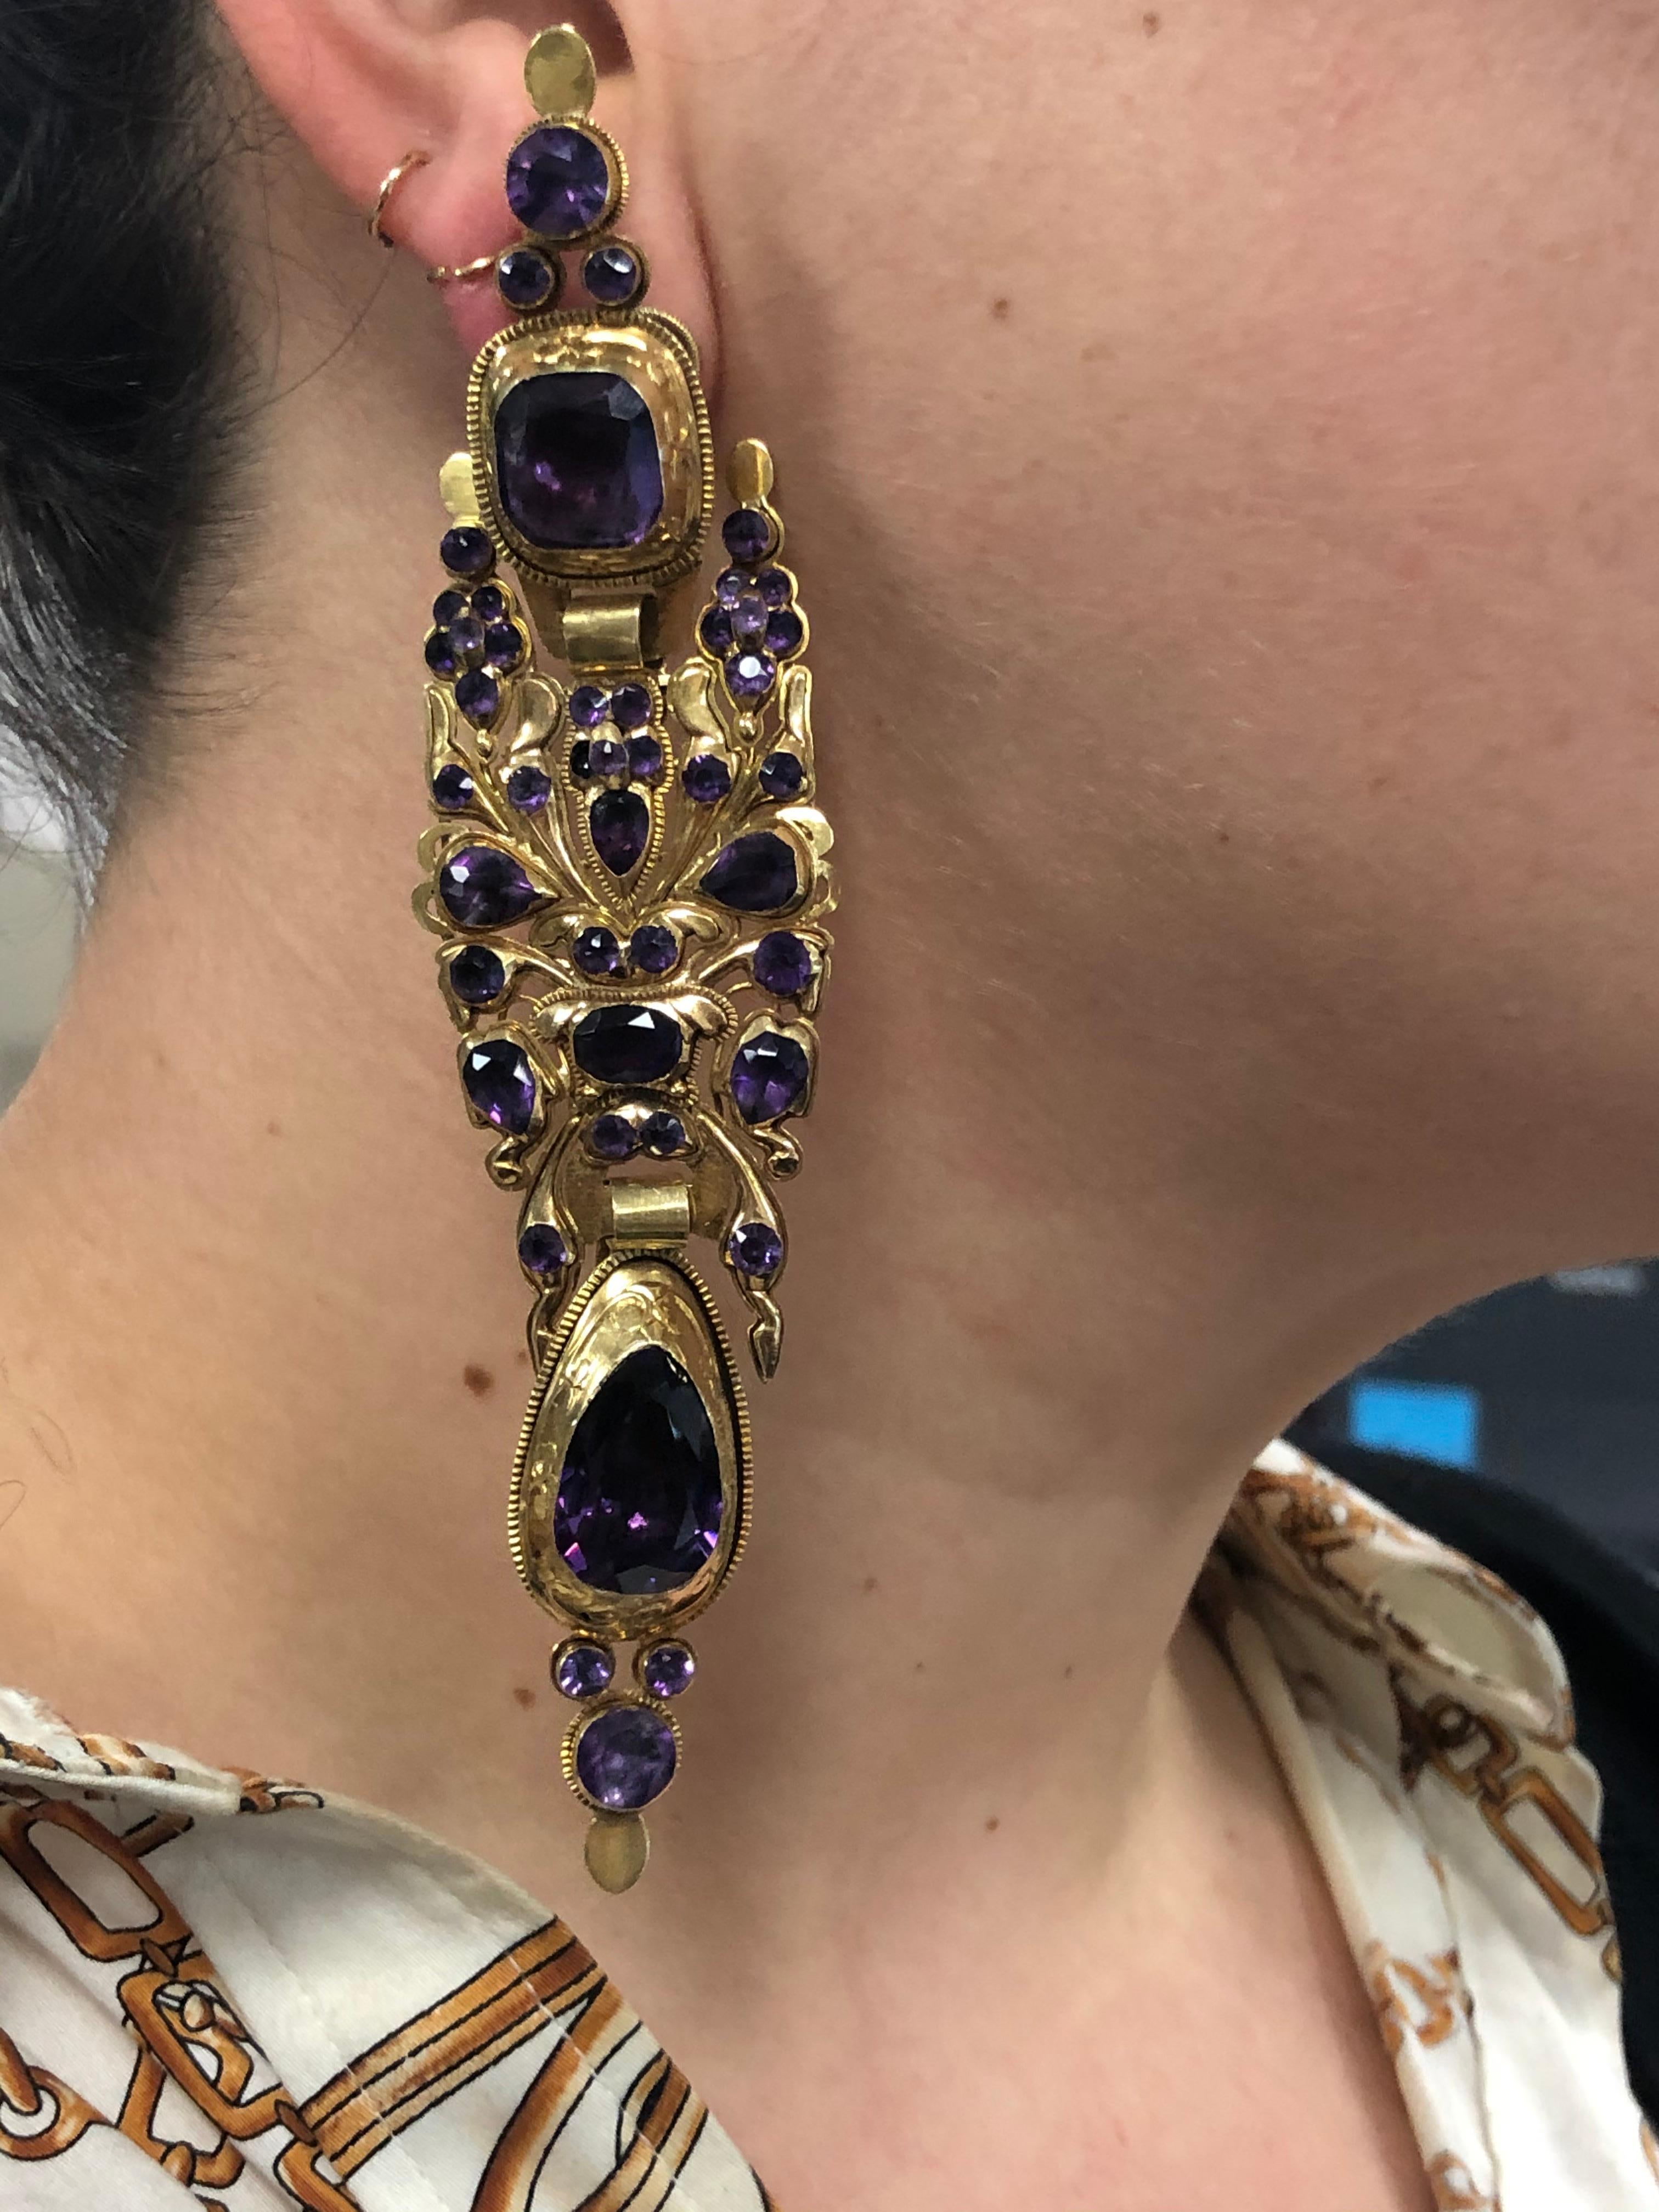 Iberian Amethyst Yellow Gold Long Pendant Earrings

Original yellow gold closed back mountings are set with rich amethysts in long Iberian earrings, circa 1850. The earrings measure 5 inches in length and 1-1/4 inch at the widest point.